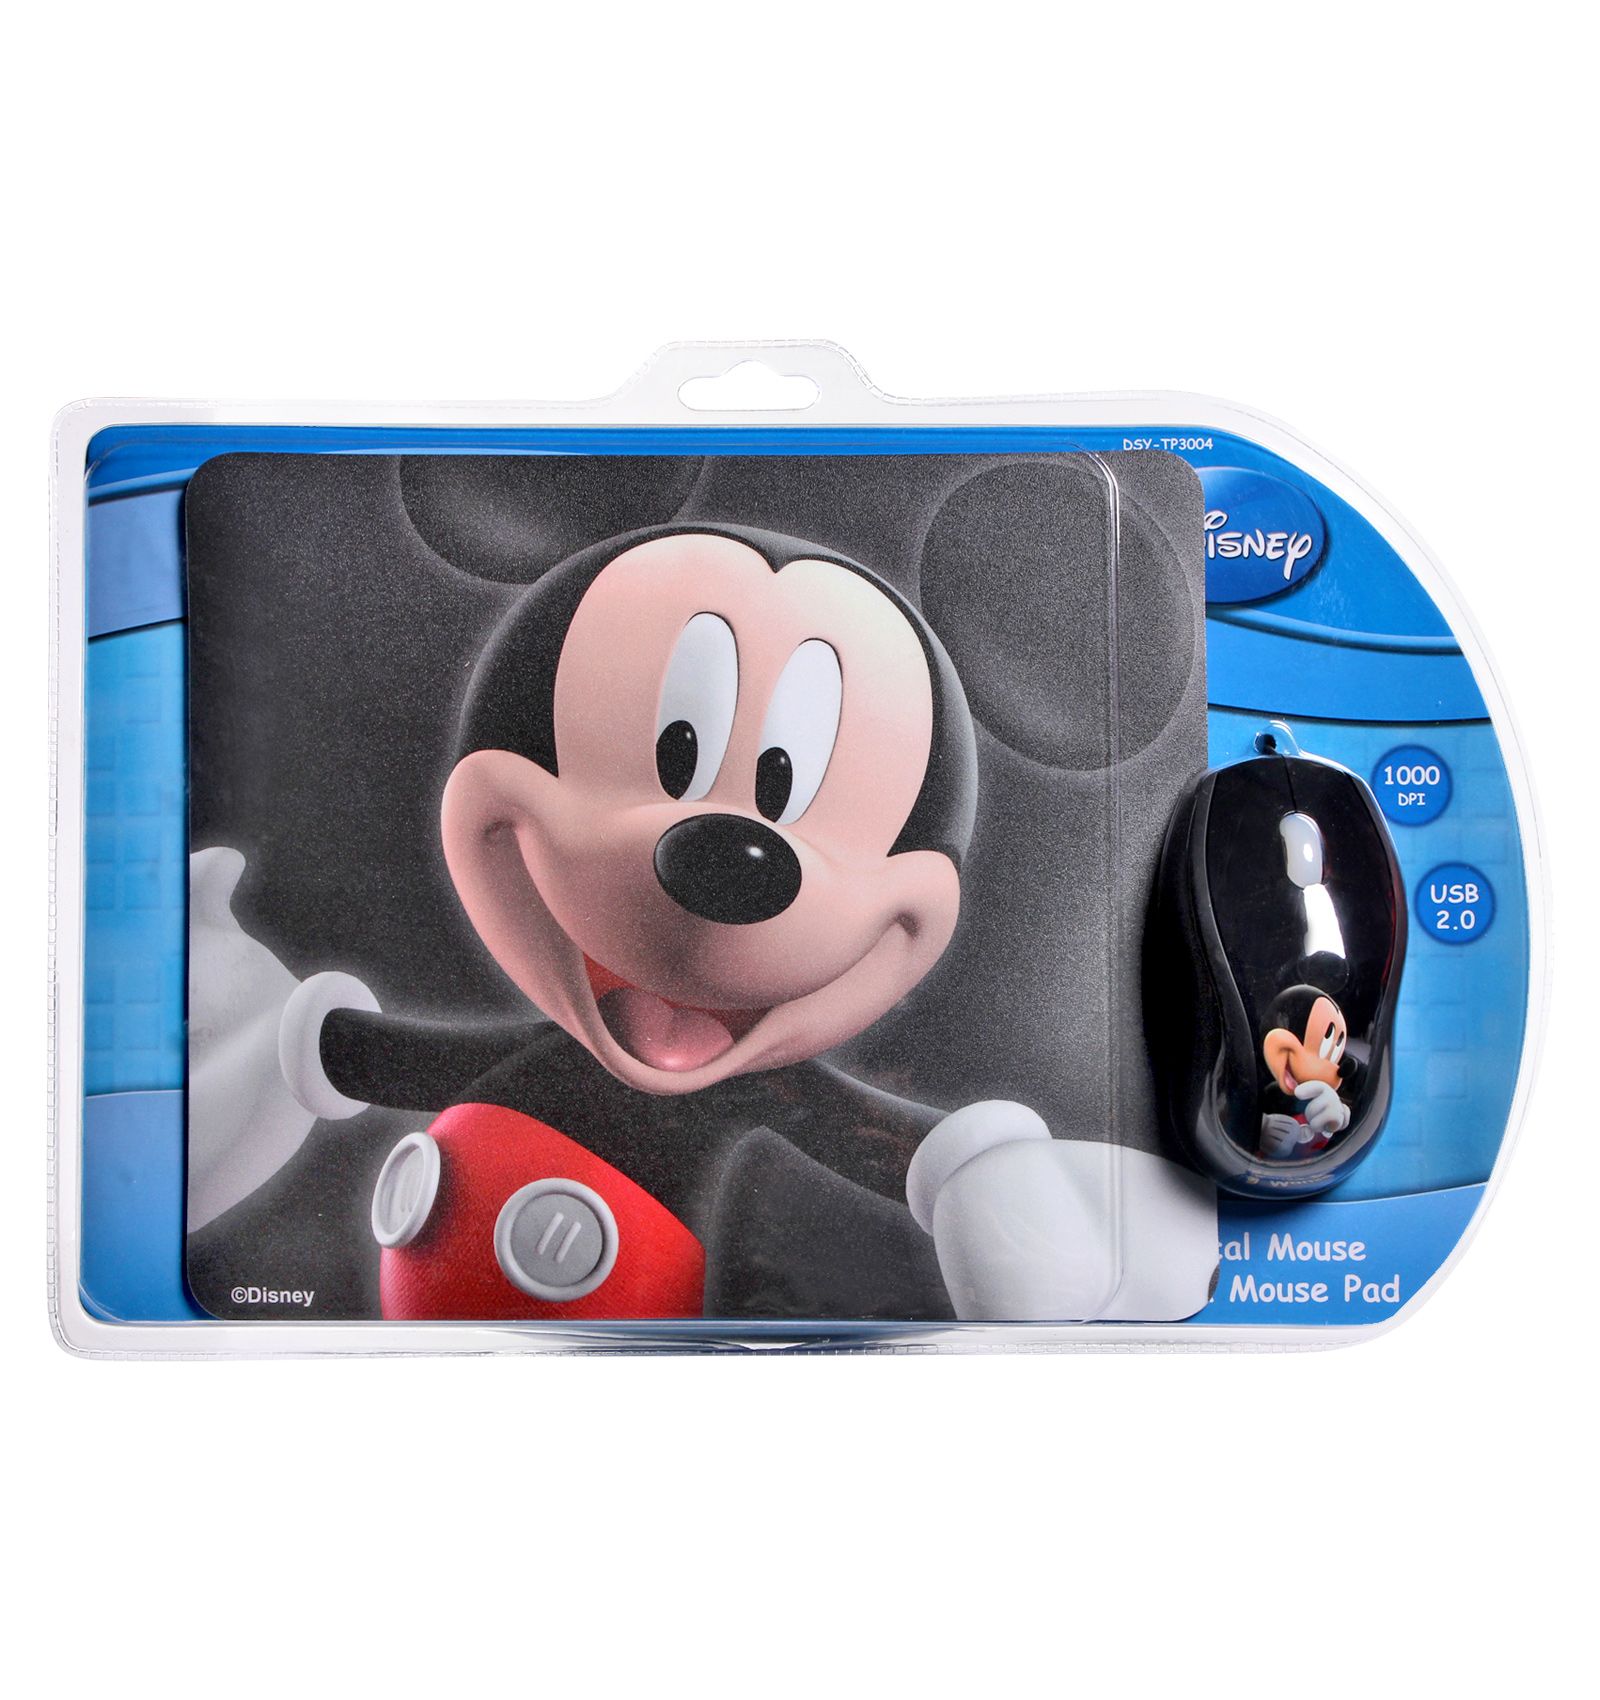 Disney Mickey Mouse Pad & Optical Mouse